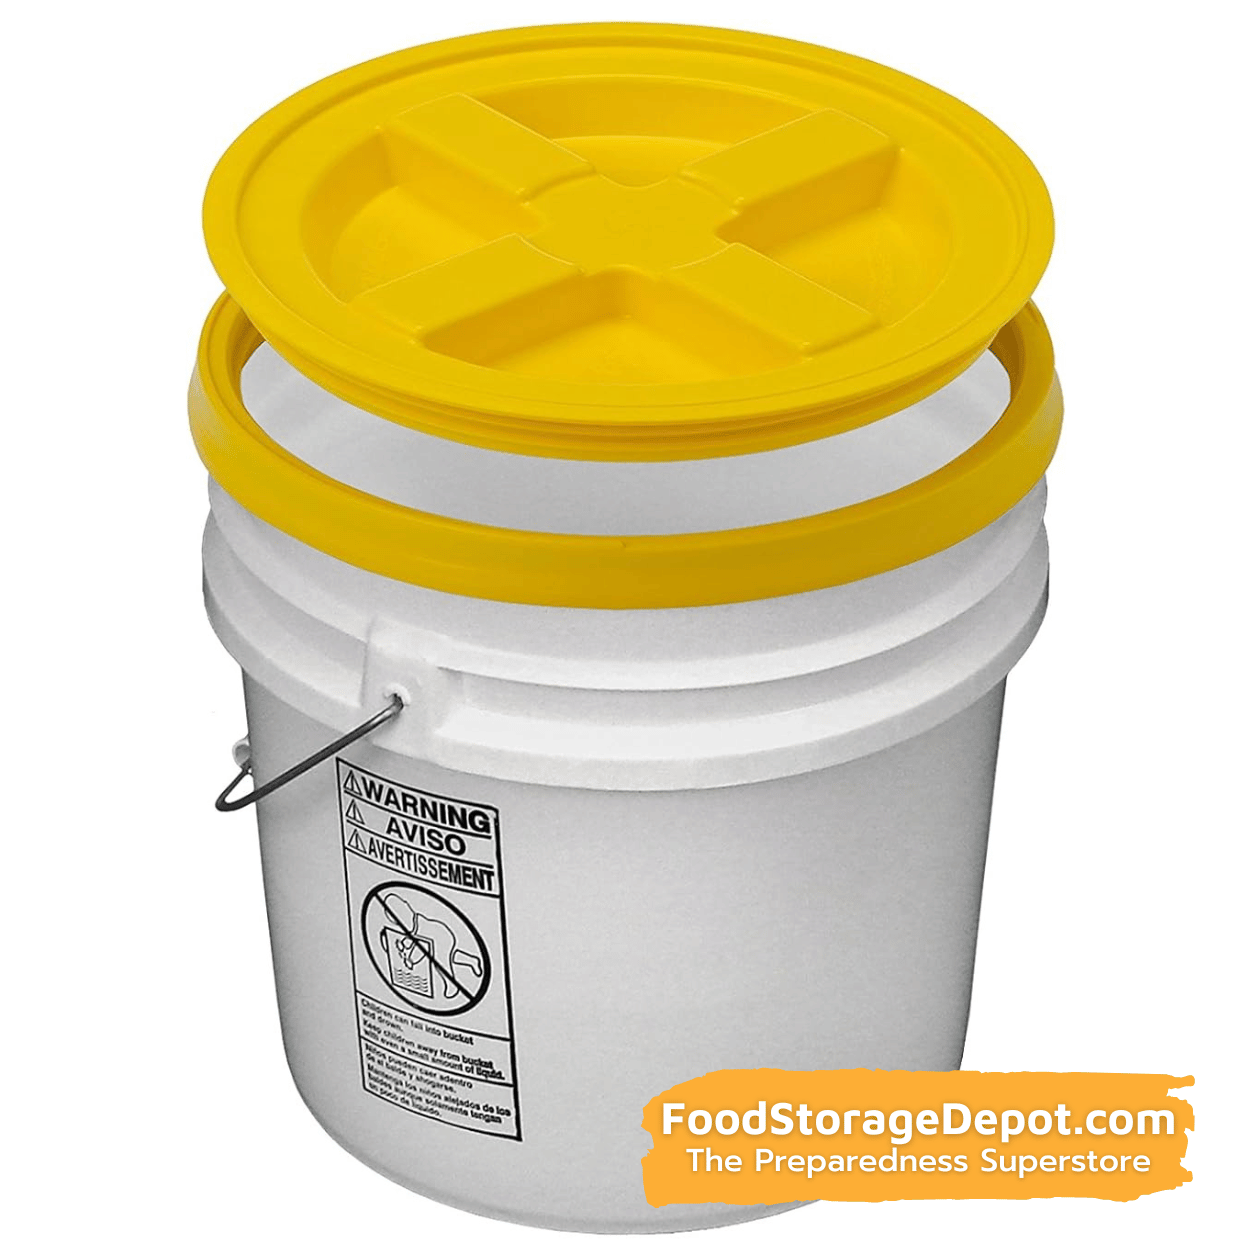 7 Gallon Large Yellow and Blue Bucket Pail Container with lid Food Grade